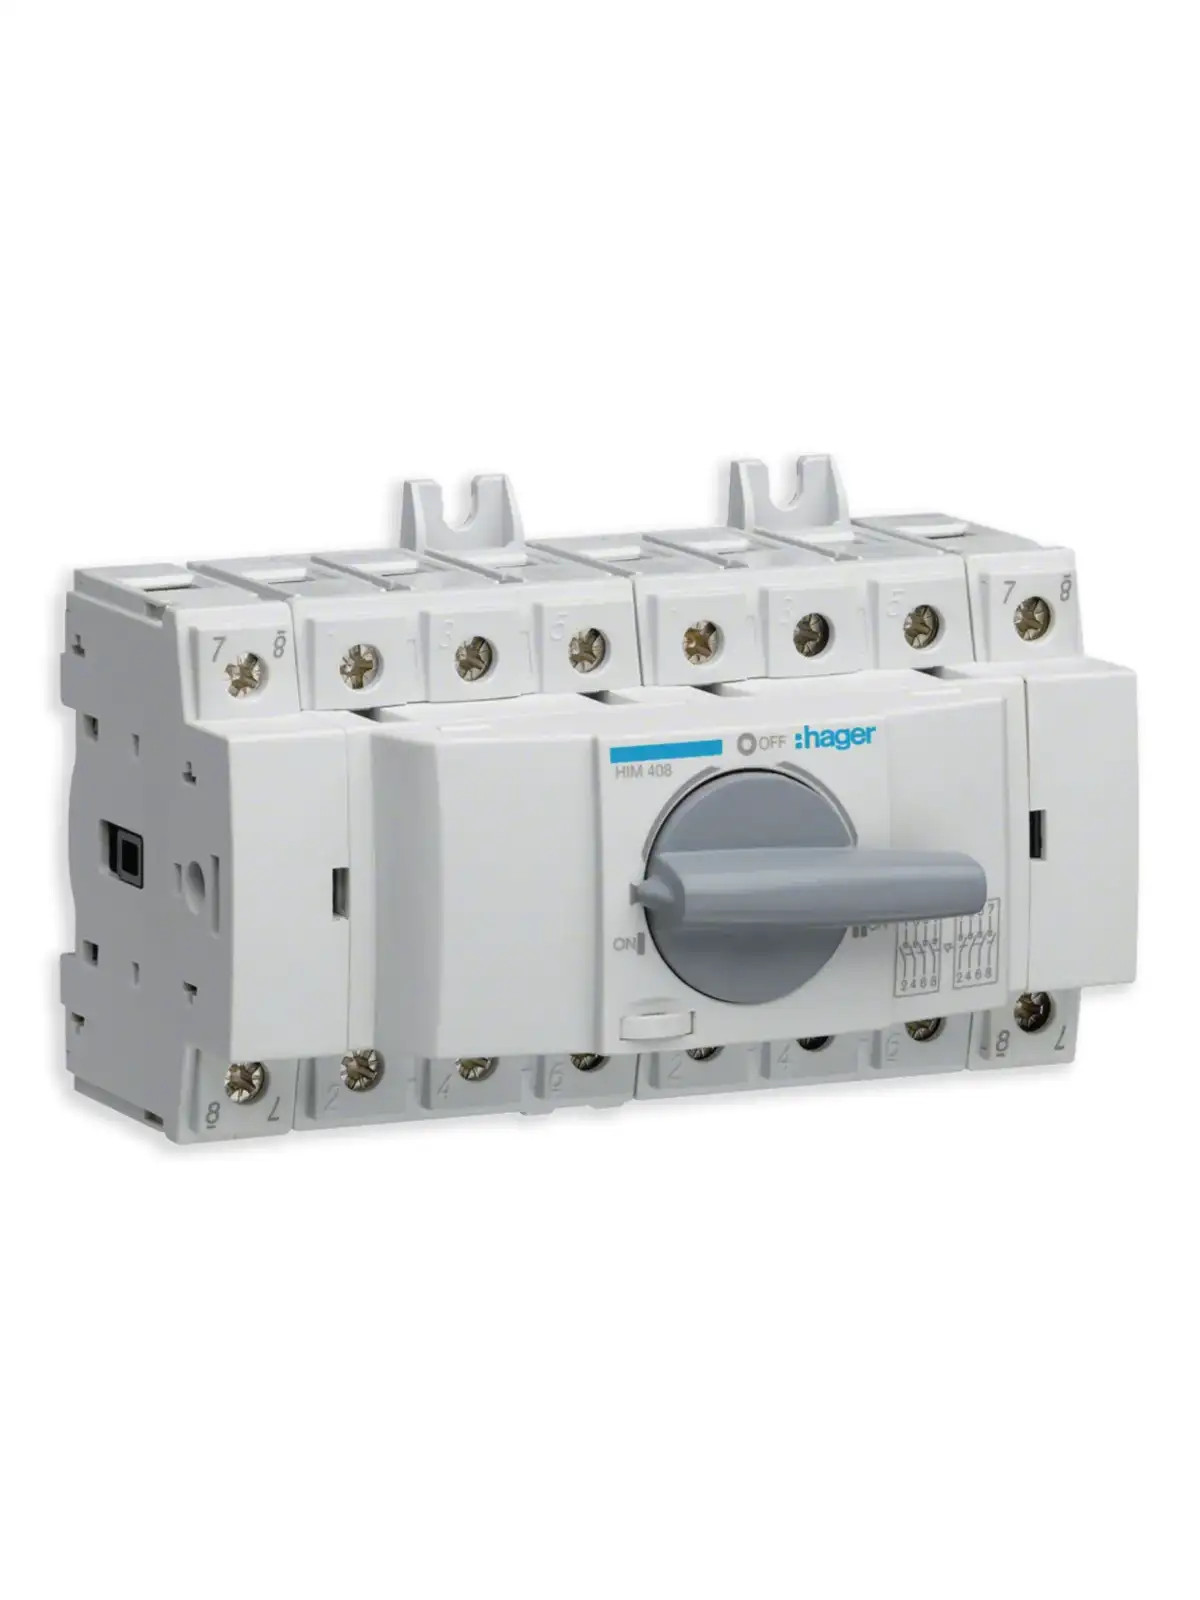 Modular changeover switch 4P 80A - Hager HIM408